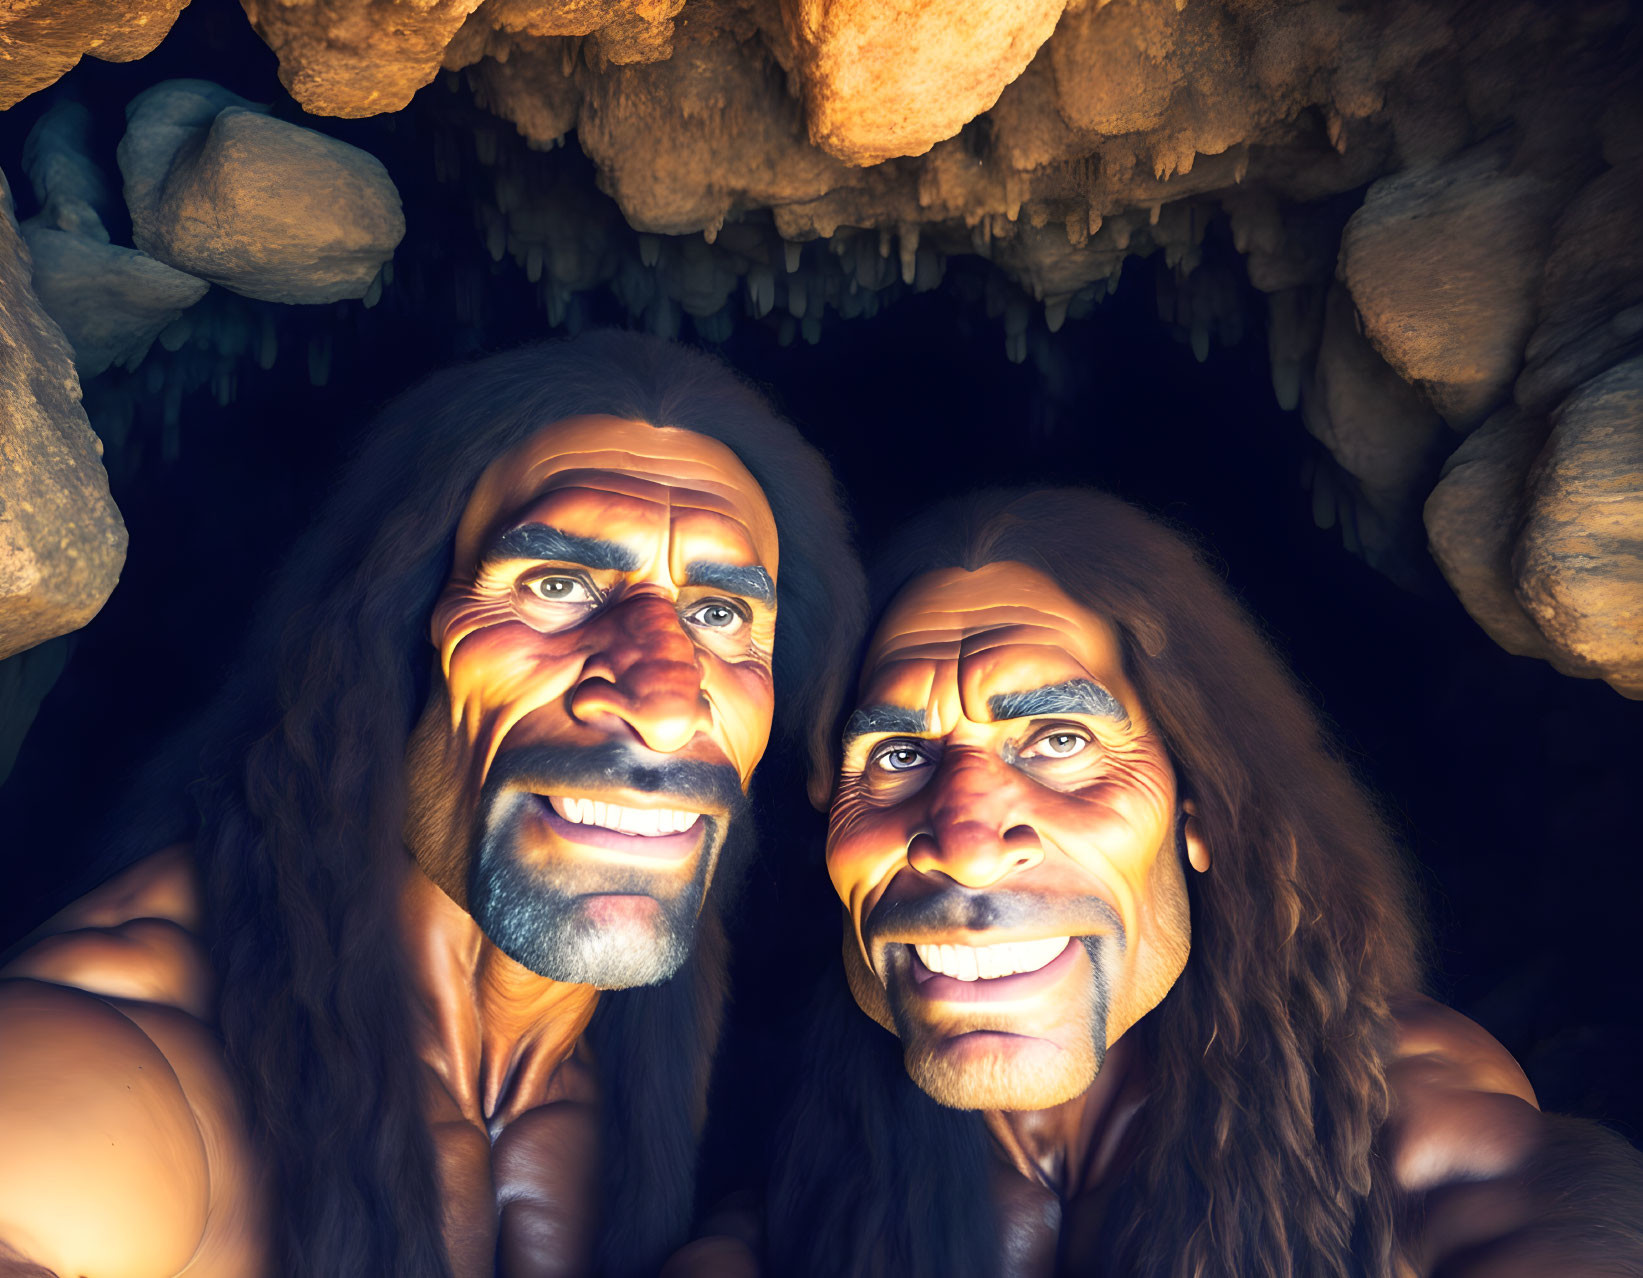 Exaggerated Neanderthal features: Prominent brows and facial hair individuals in a dark cave